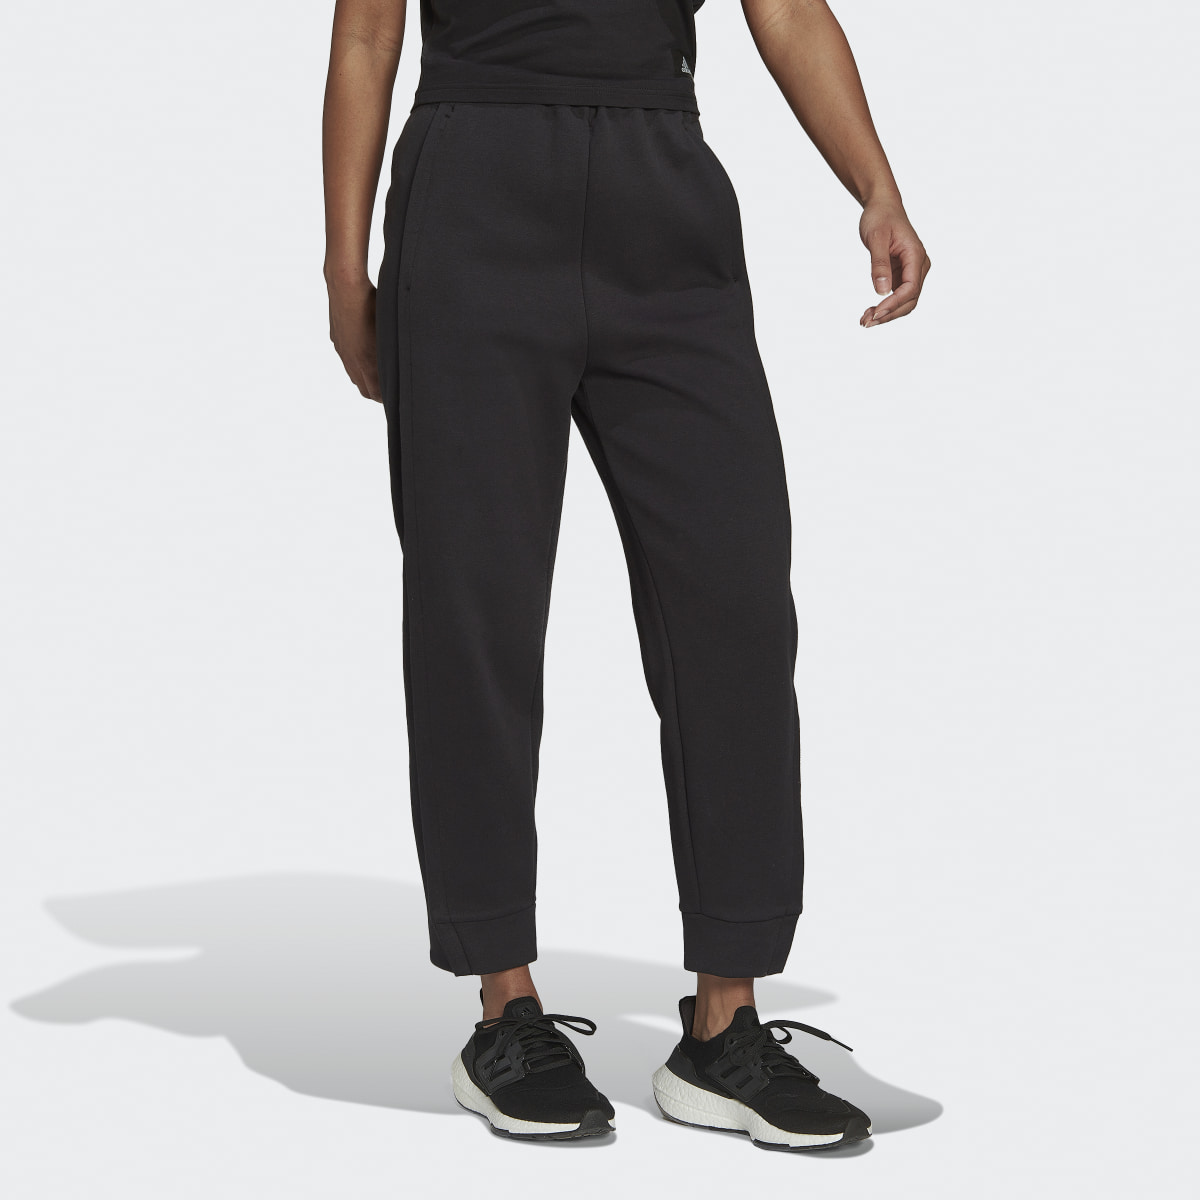 Adidas Mission Victory Regular Fit 7/8 Tracksuit Bottoms. 4